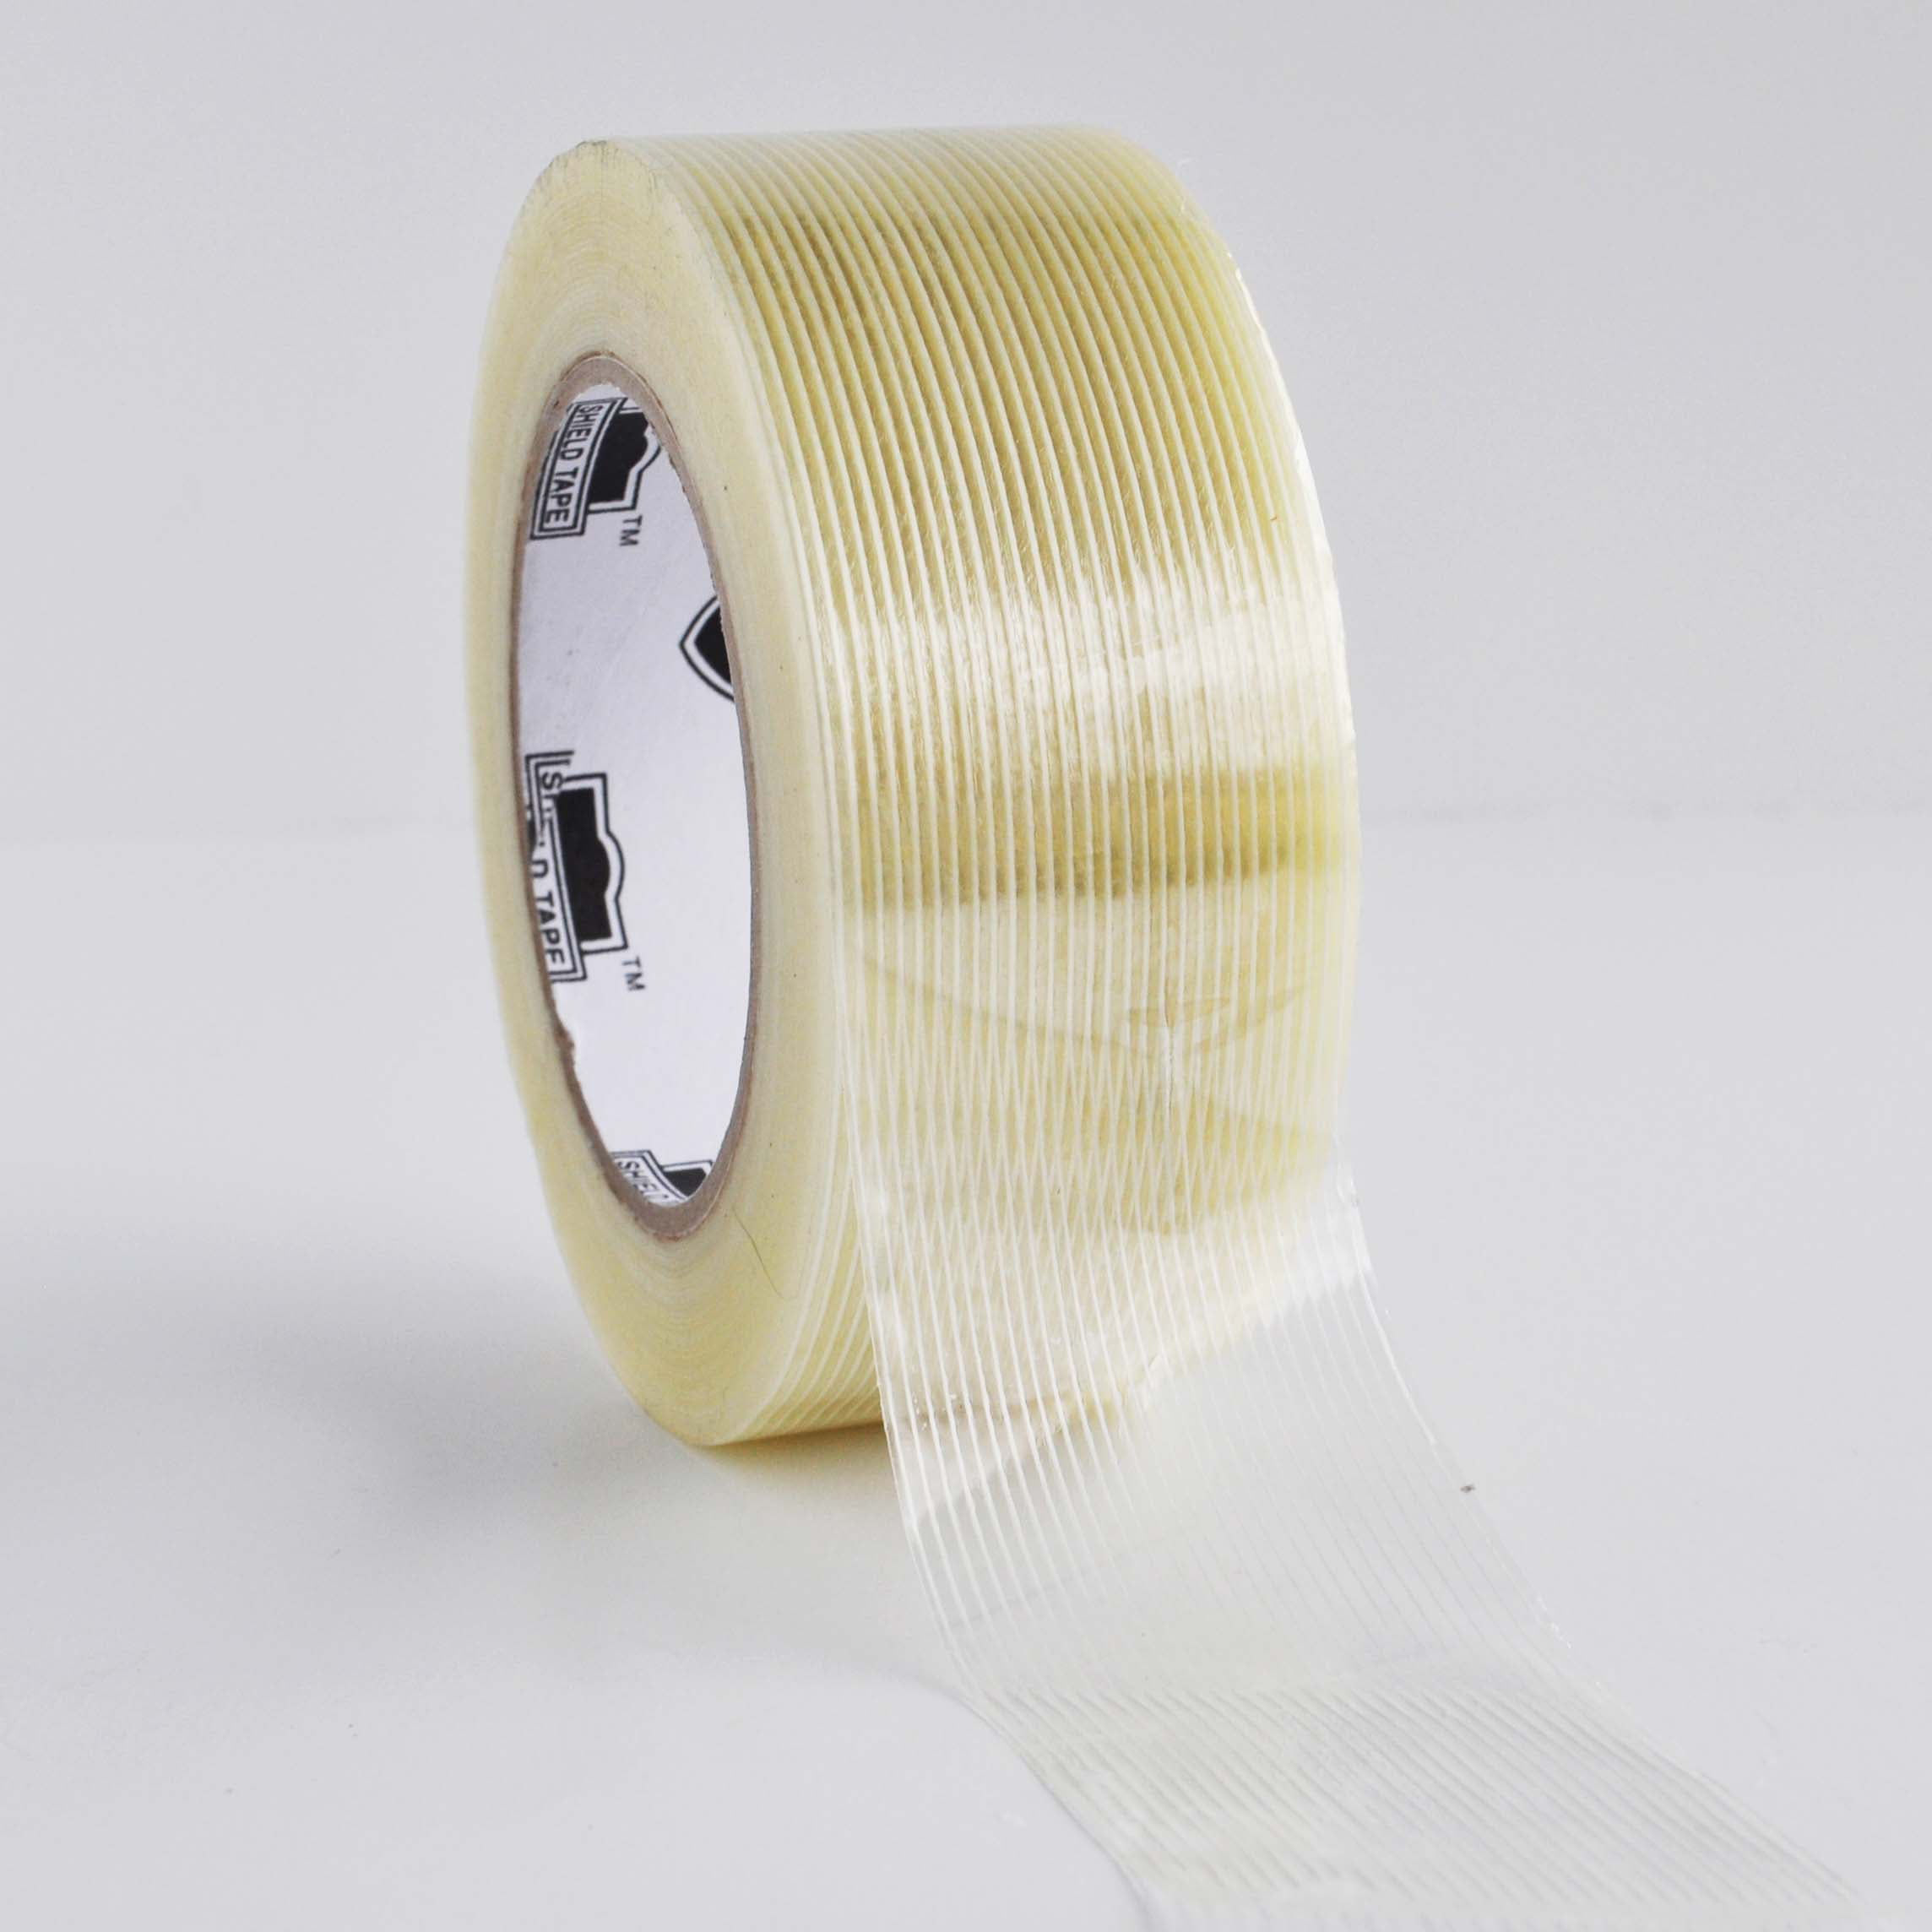 x 60 yds. WOD Bifilament Reinforced Strapping Hexayurt Tape 6 in 